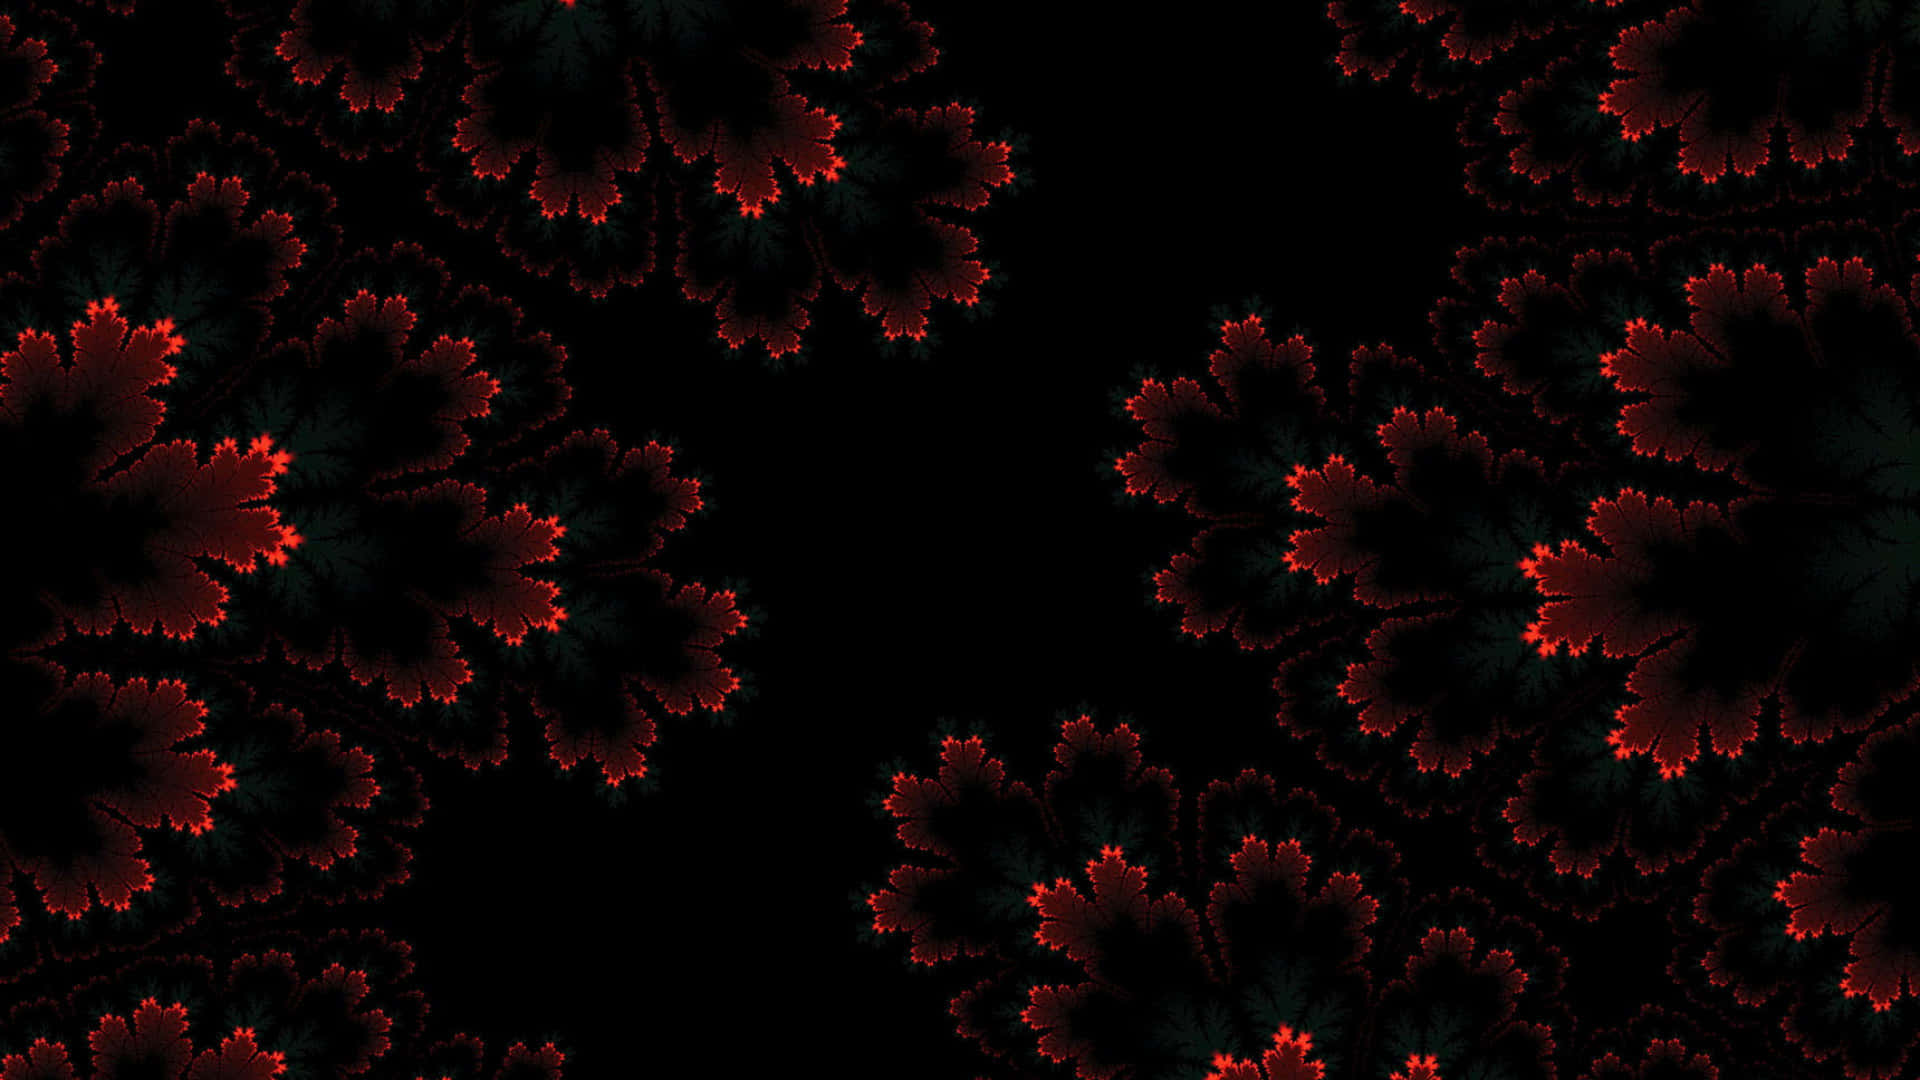 A Red And Black Floral Pattern On A Black Background Wallpaper